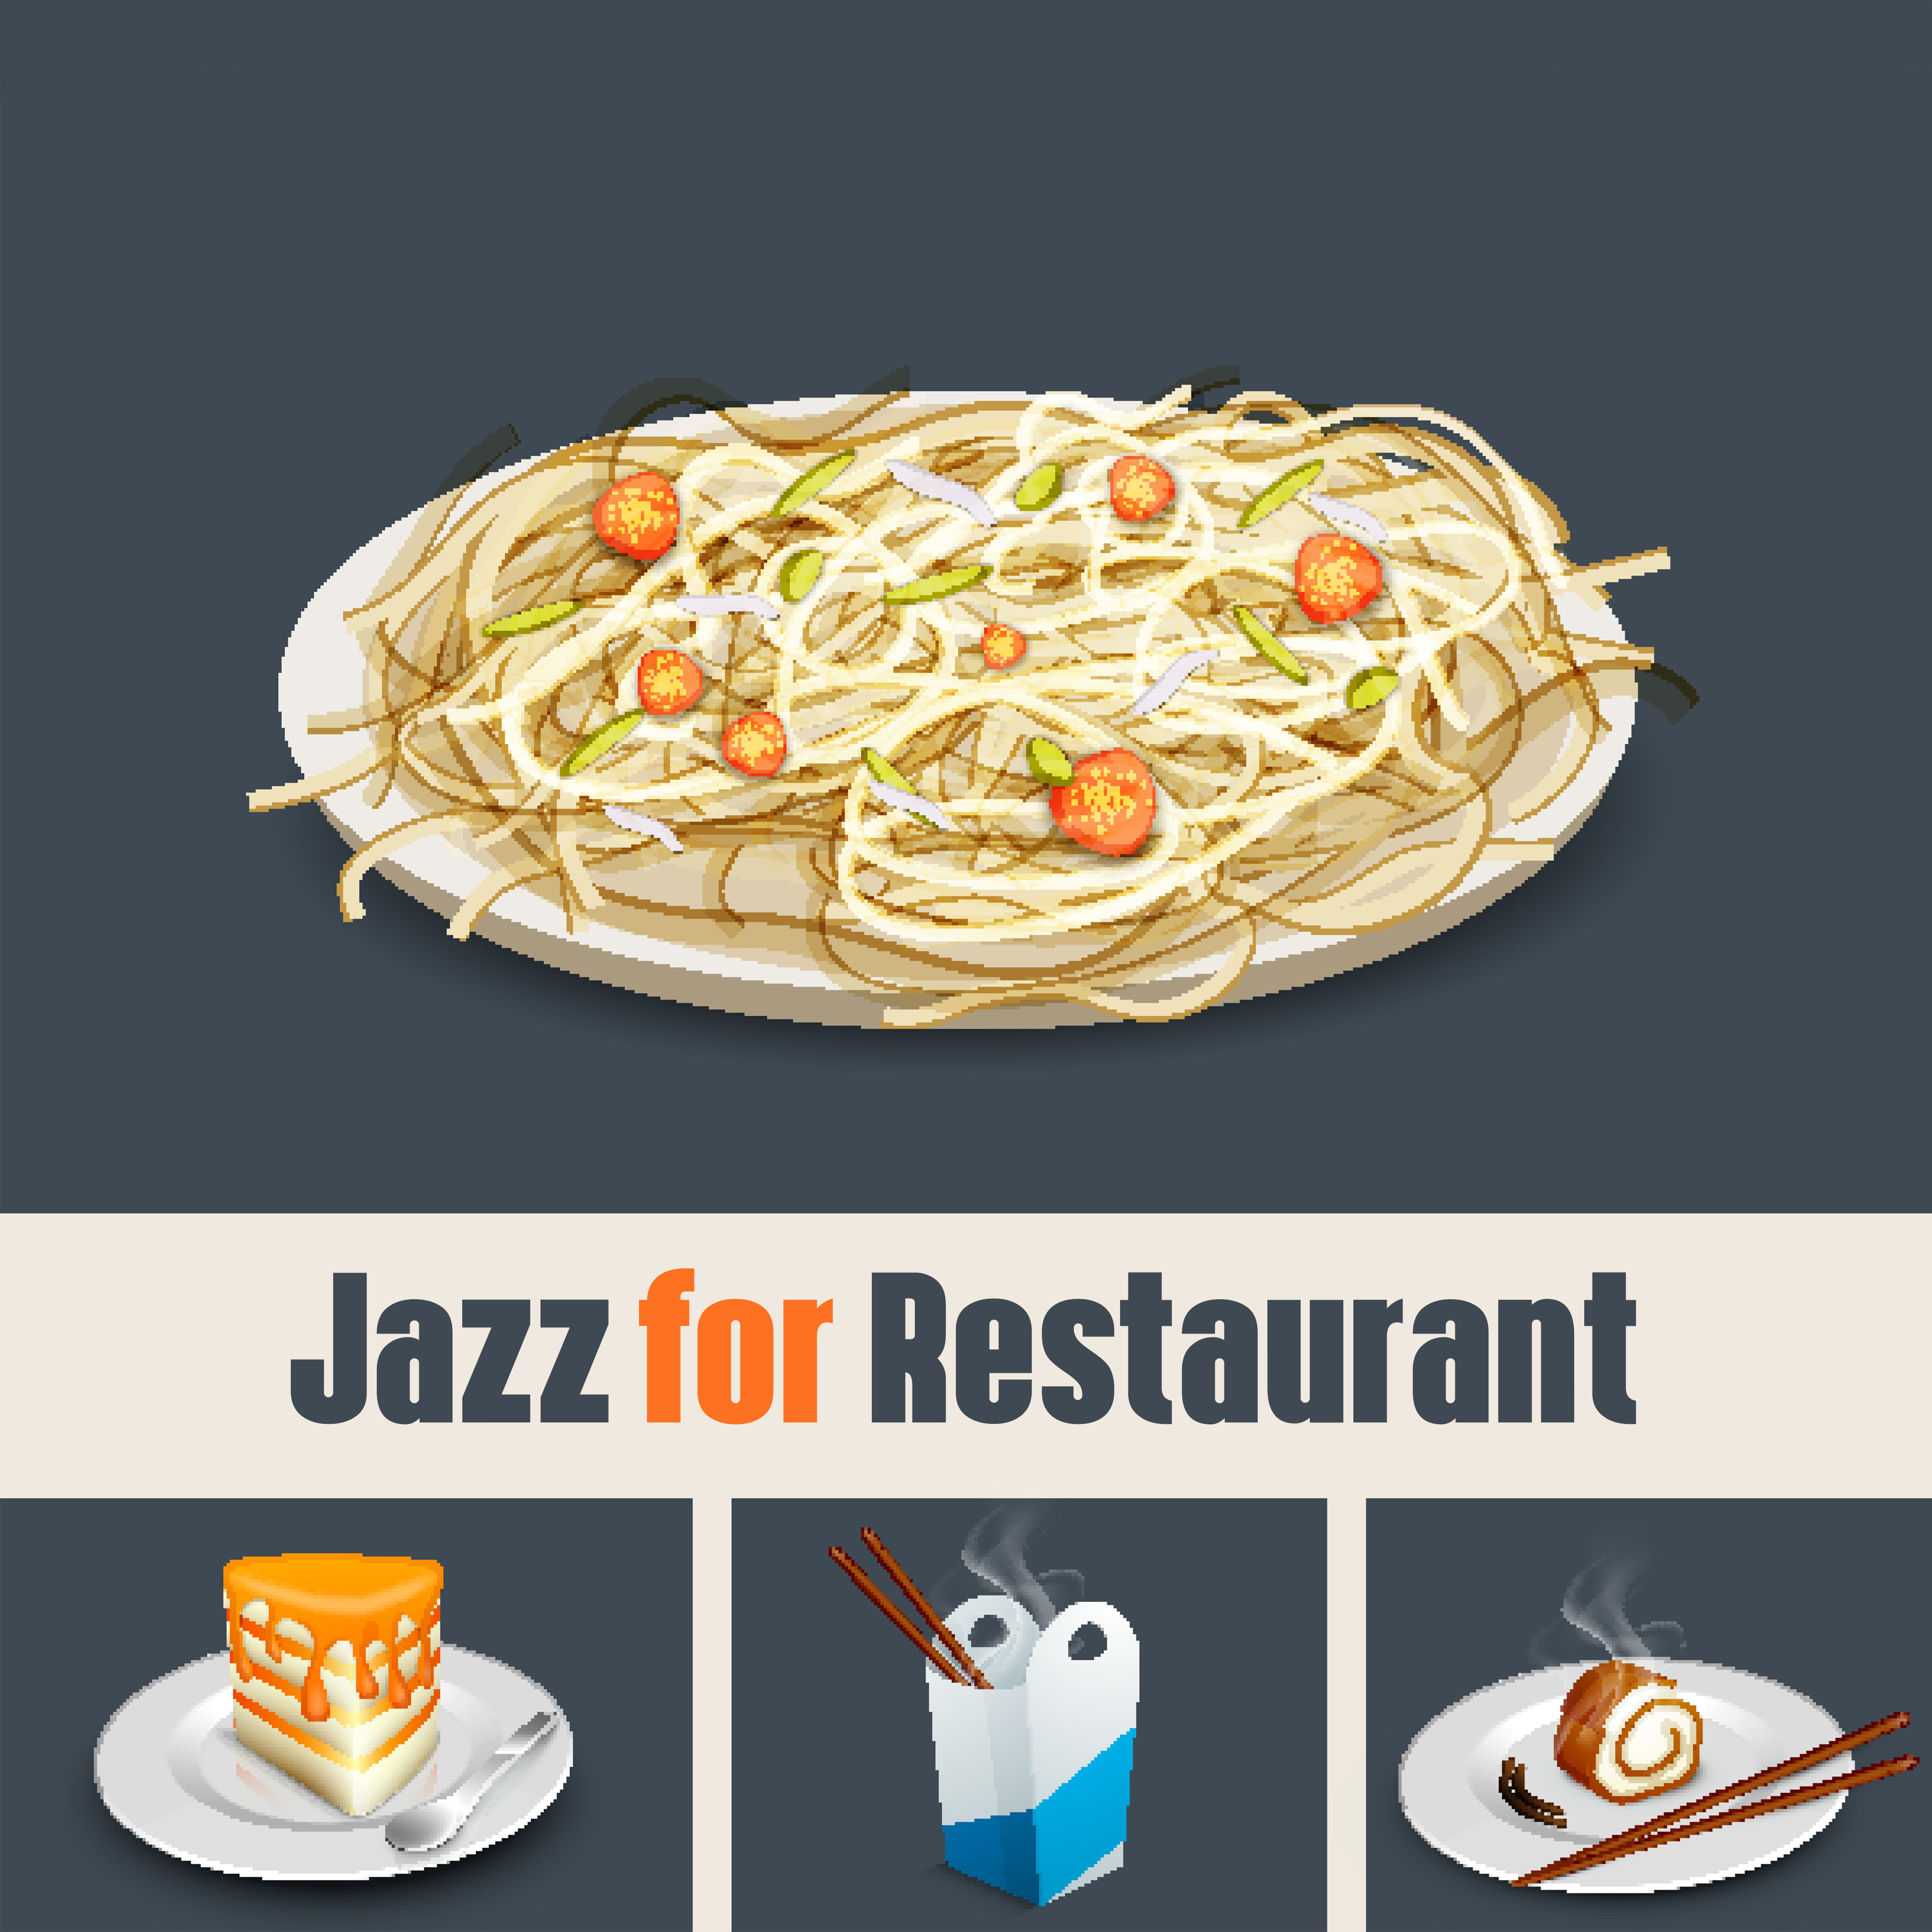 Jazz for Restaurant  Relaxation, Dinner with Family, Soft Piano, Chilled Jazz, Coffee Talk, Rest, Jazz Club